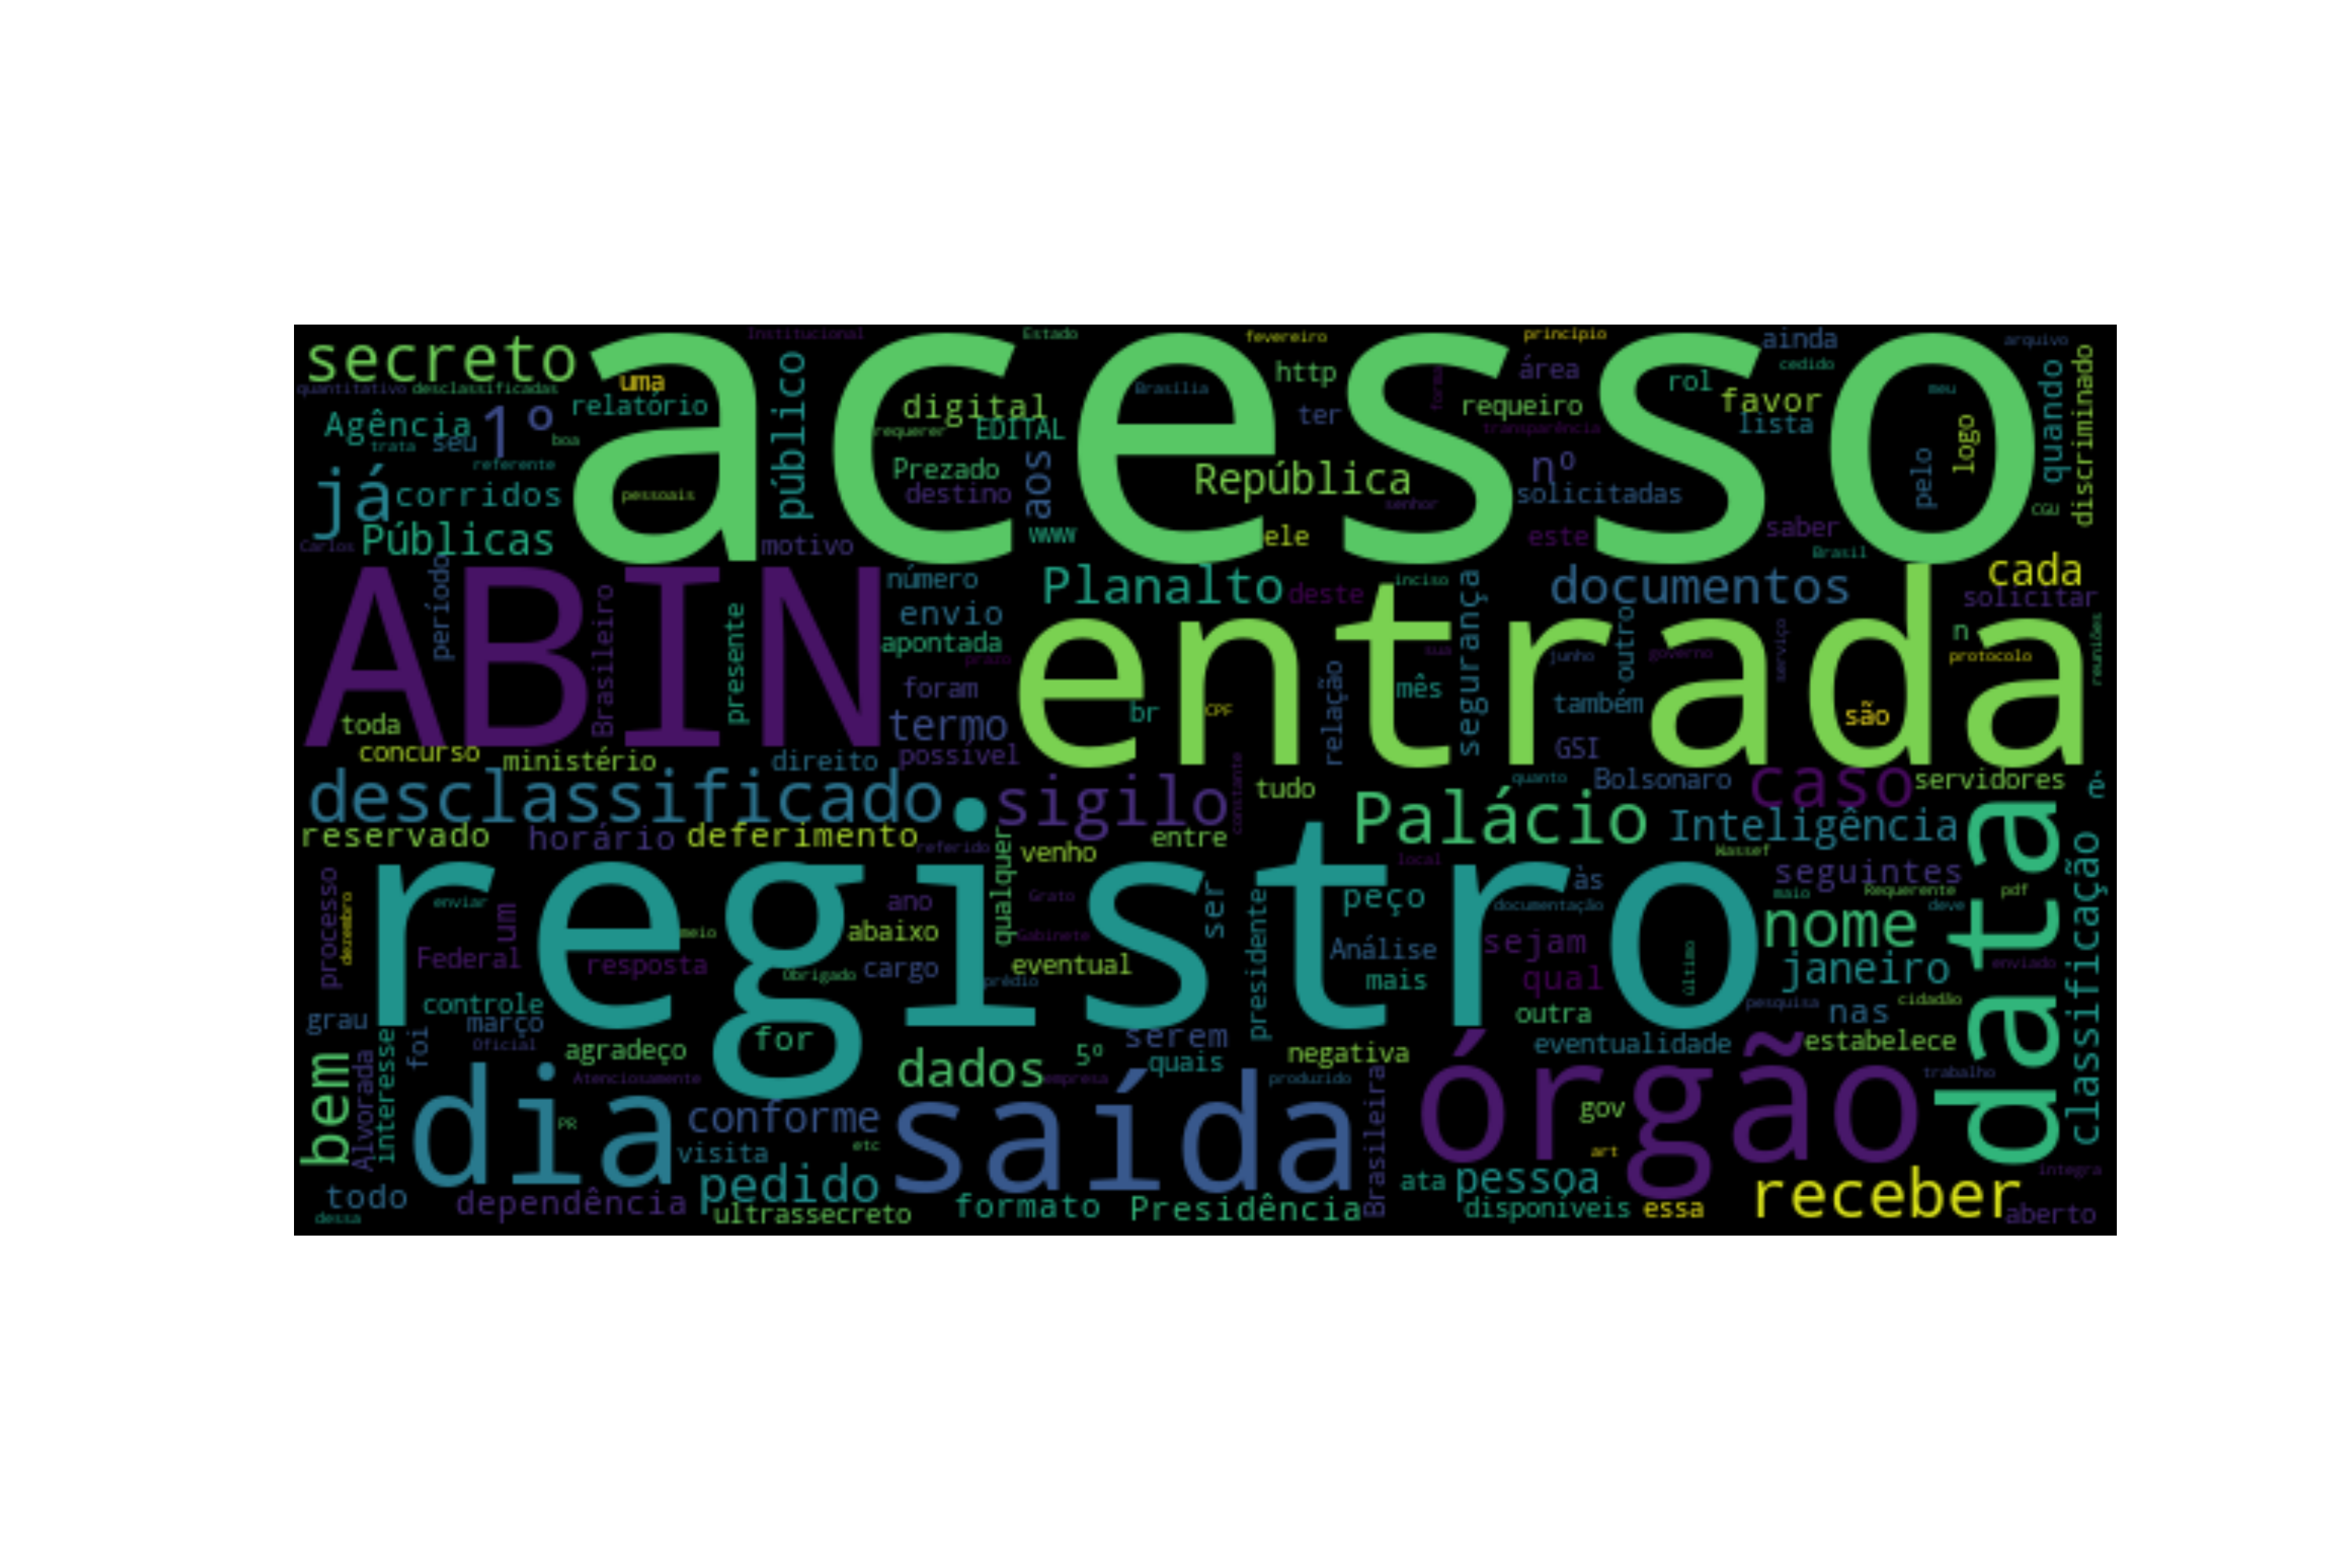 word cloud containing words related to denied requests in 2020,
such as my, aid, emergencial and installment